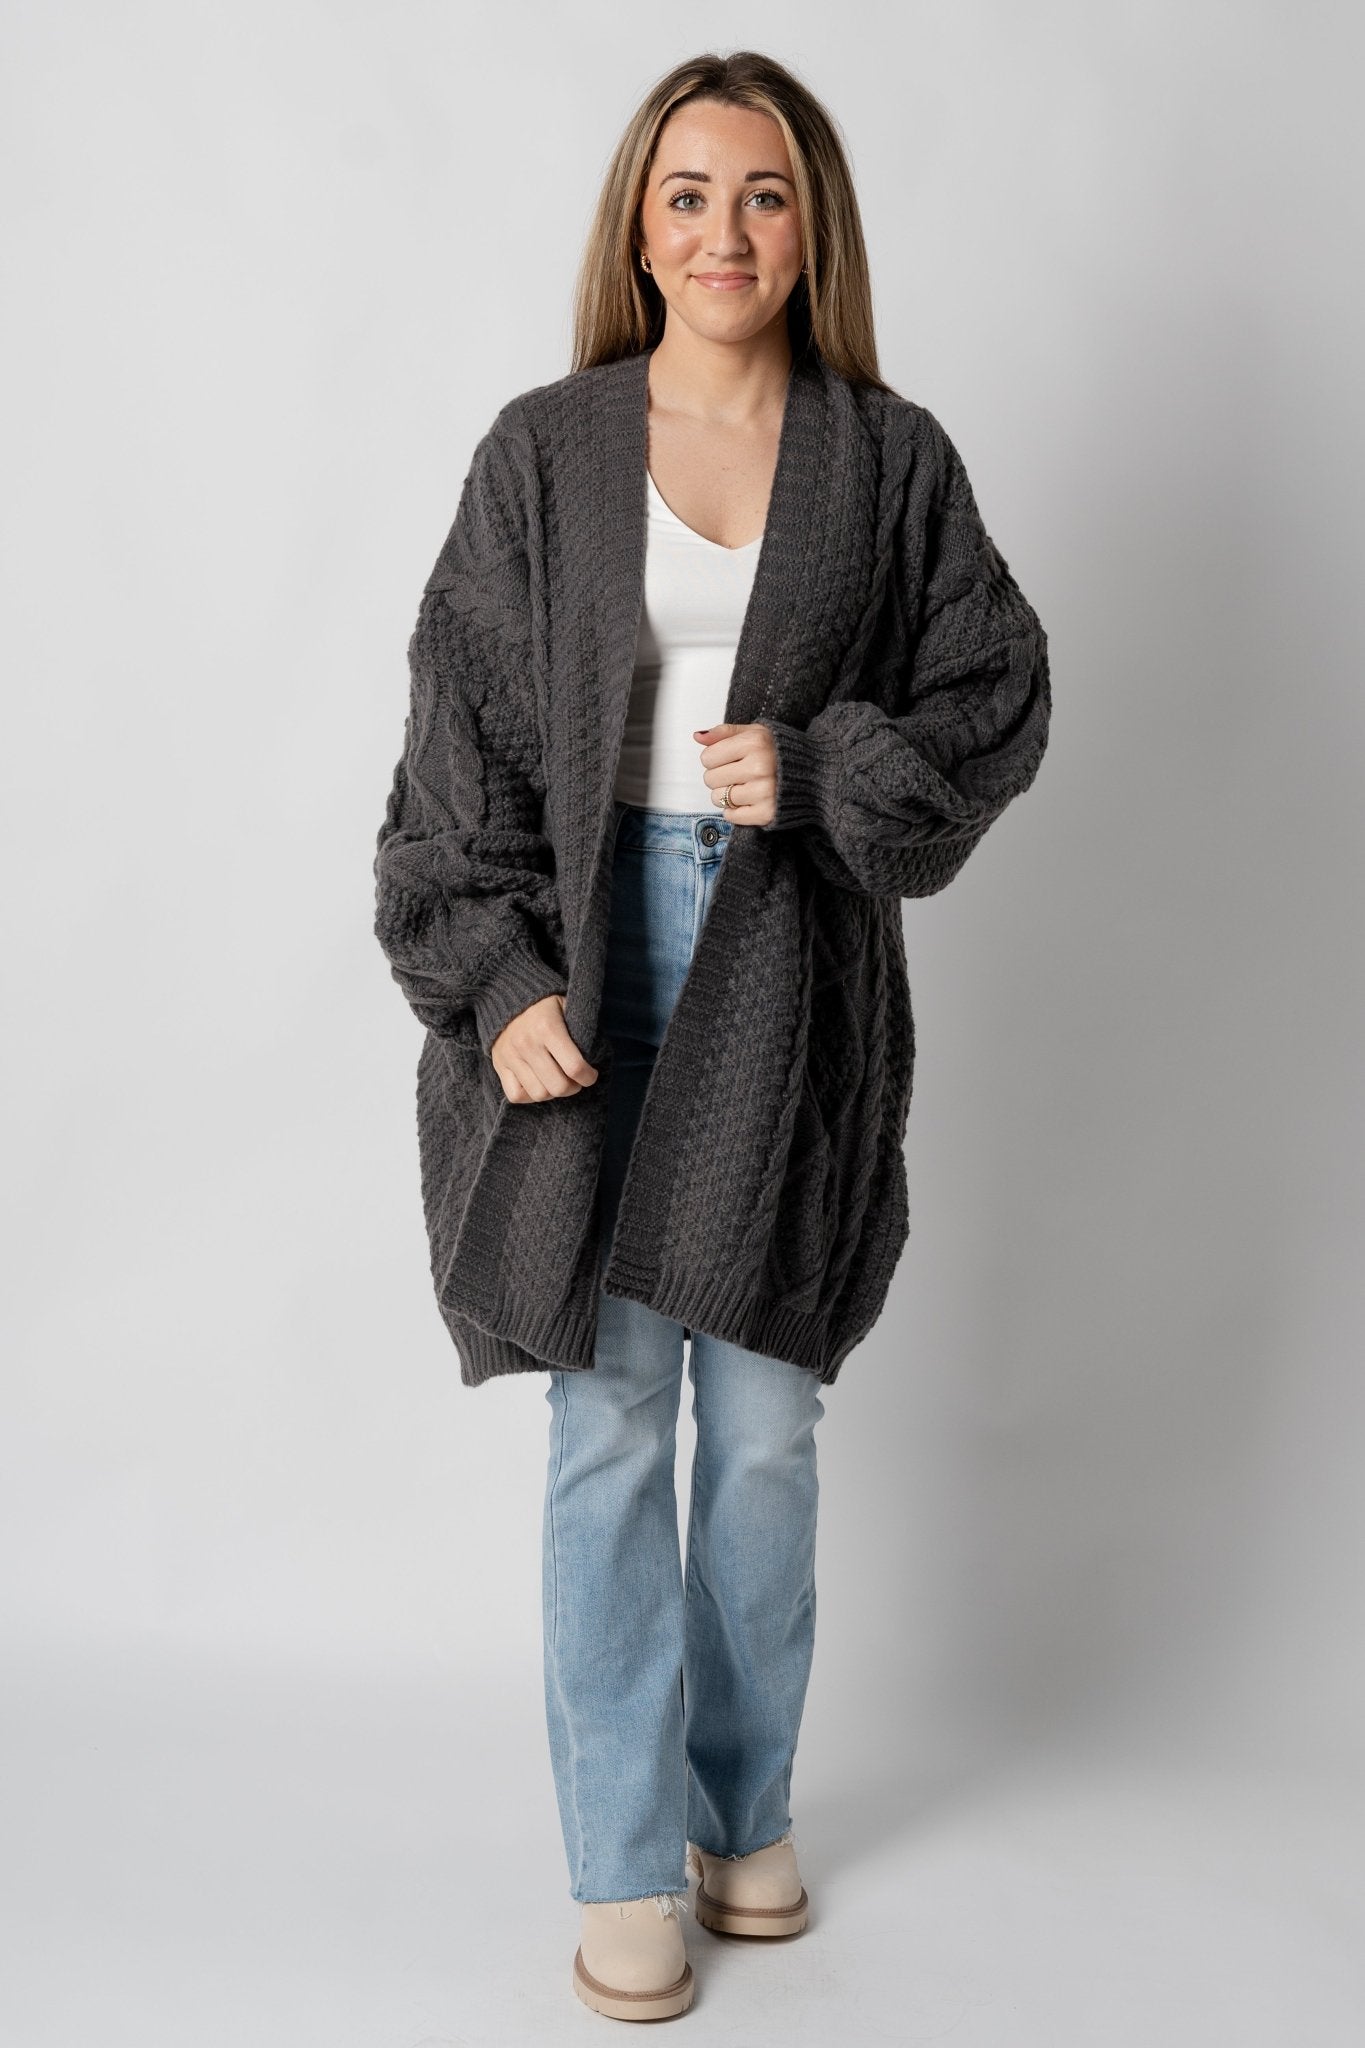 Chunky cable knit cardigan charcoal - Trendy Cardigan - Fashion Cardigans & Cute Kimonos at Lush Fashion Lounge Boutique in Oklahoma City